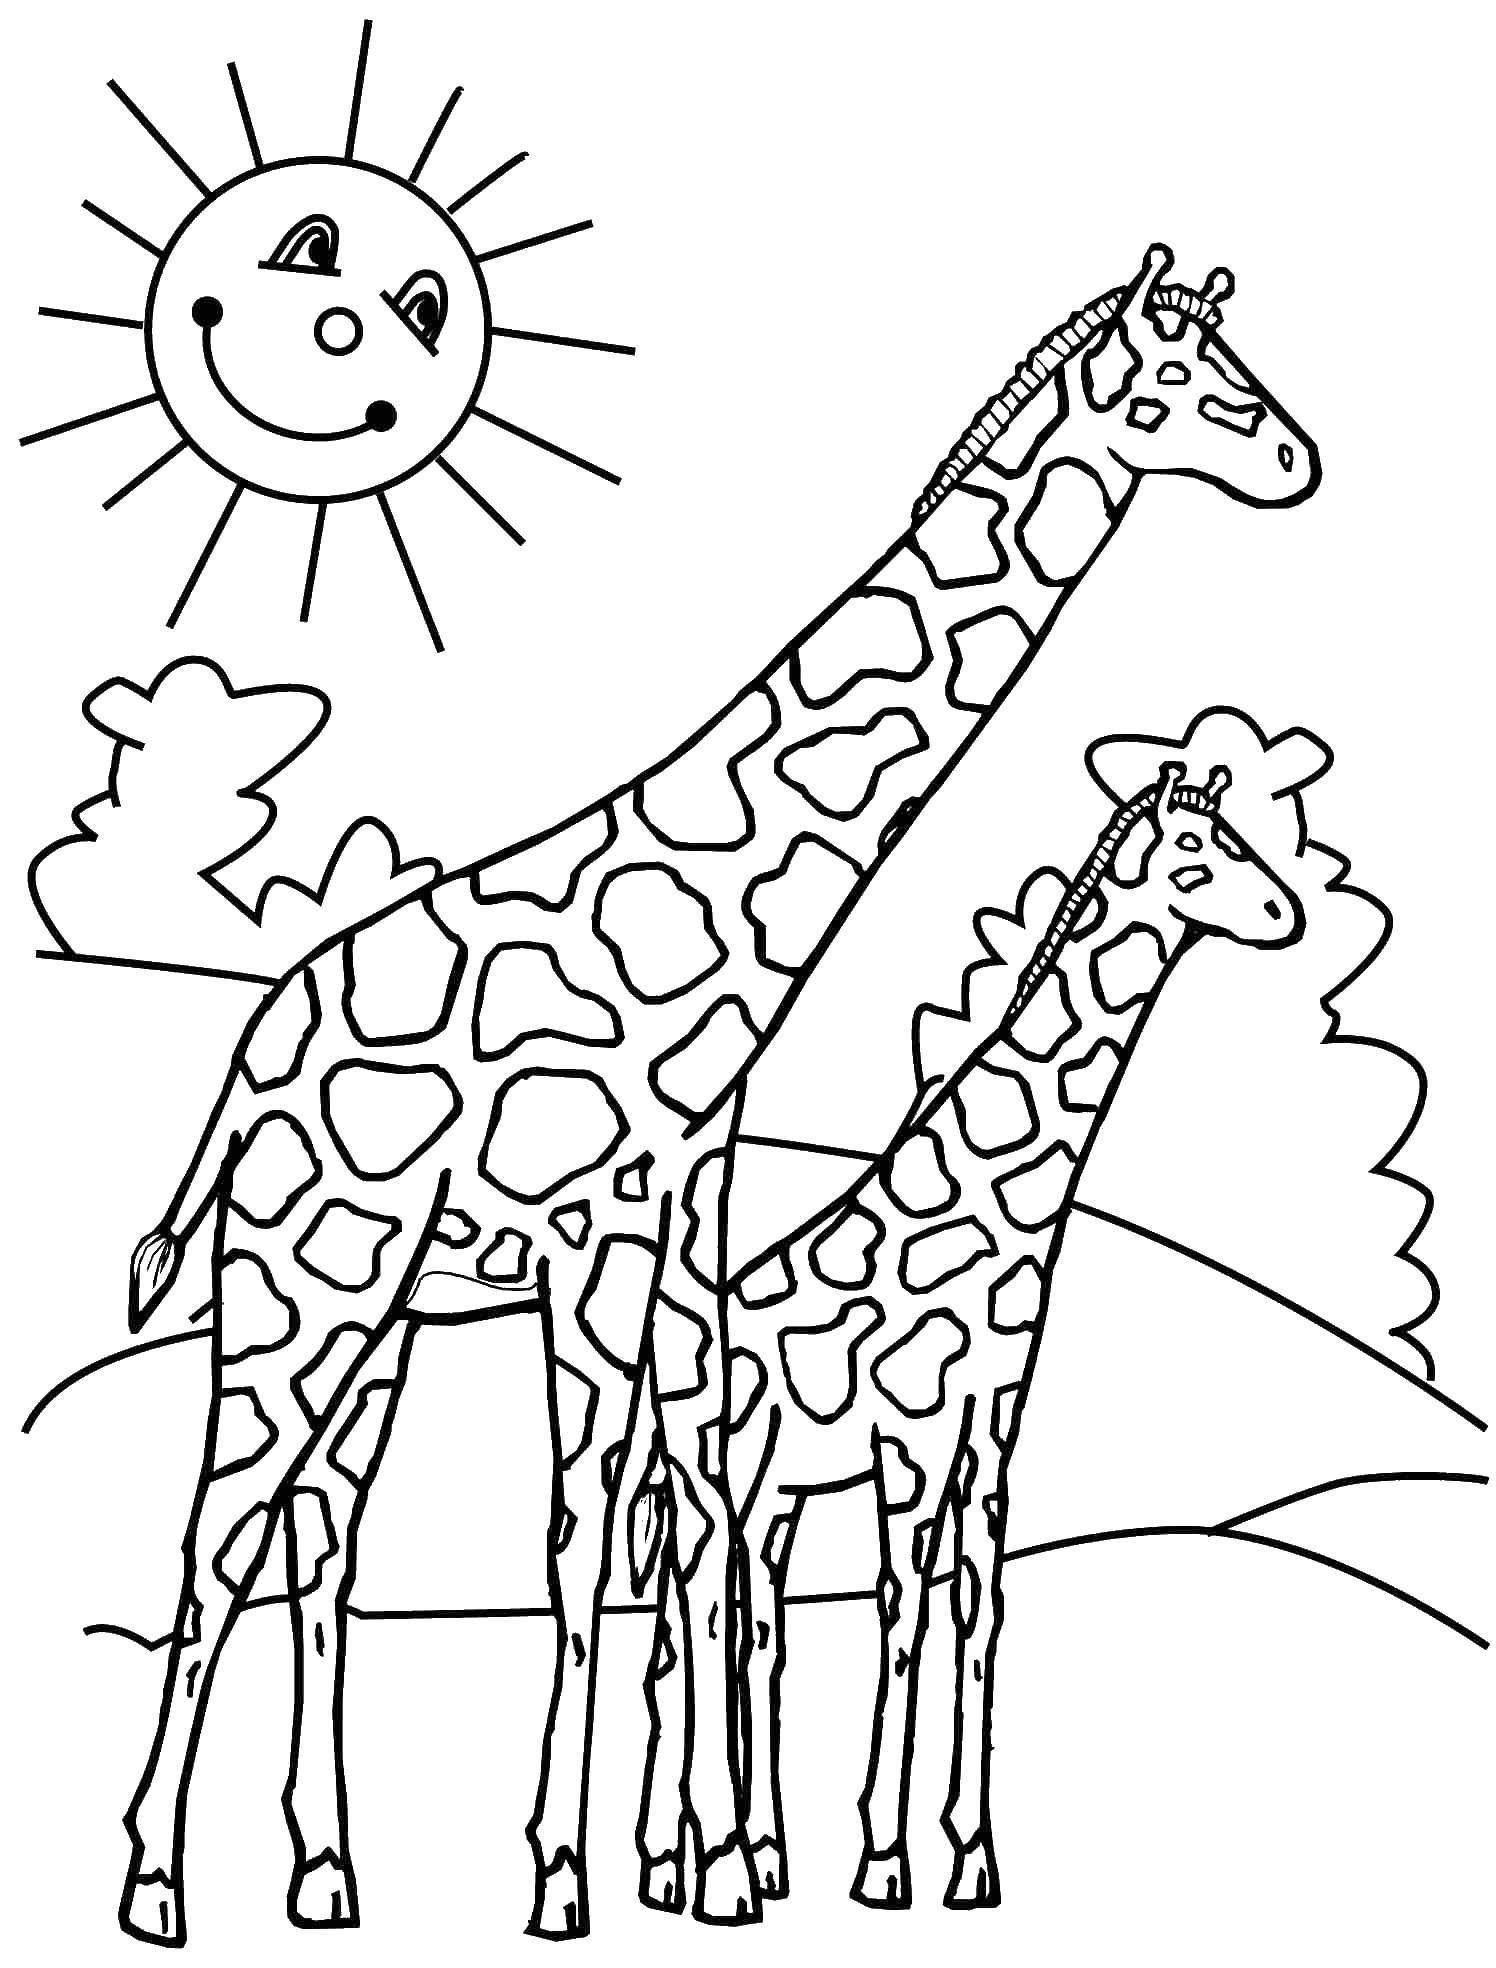 Coloring Two giraffe. Category wild animals. Tags:  wild animals, giraffes.